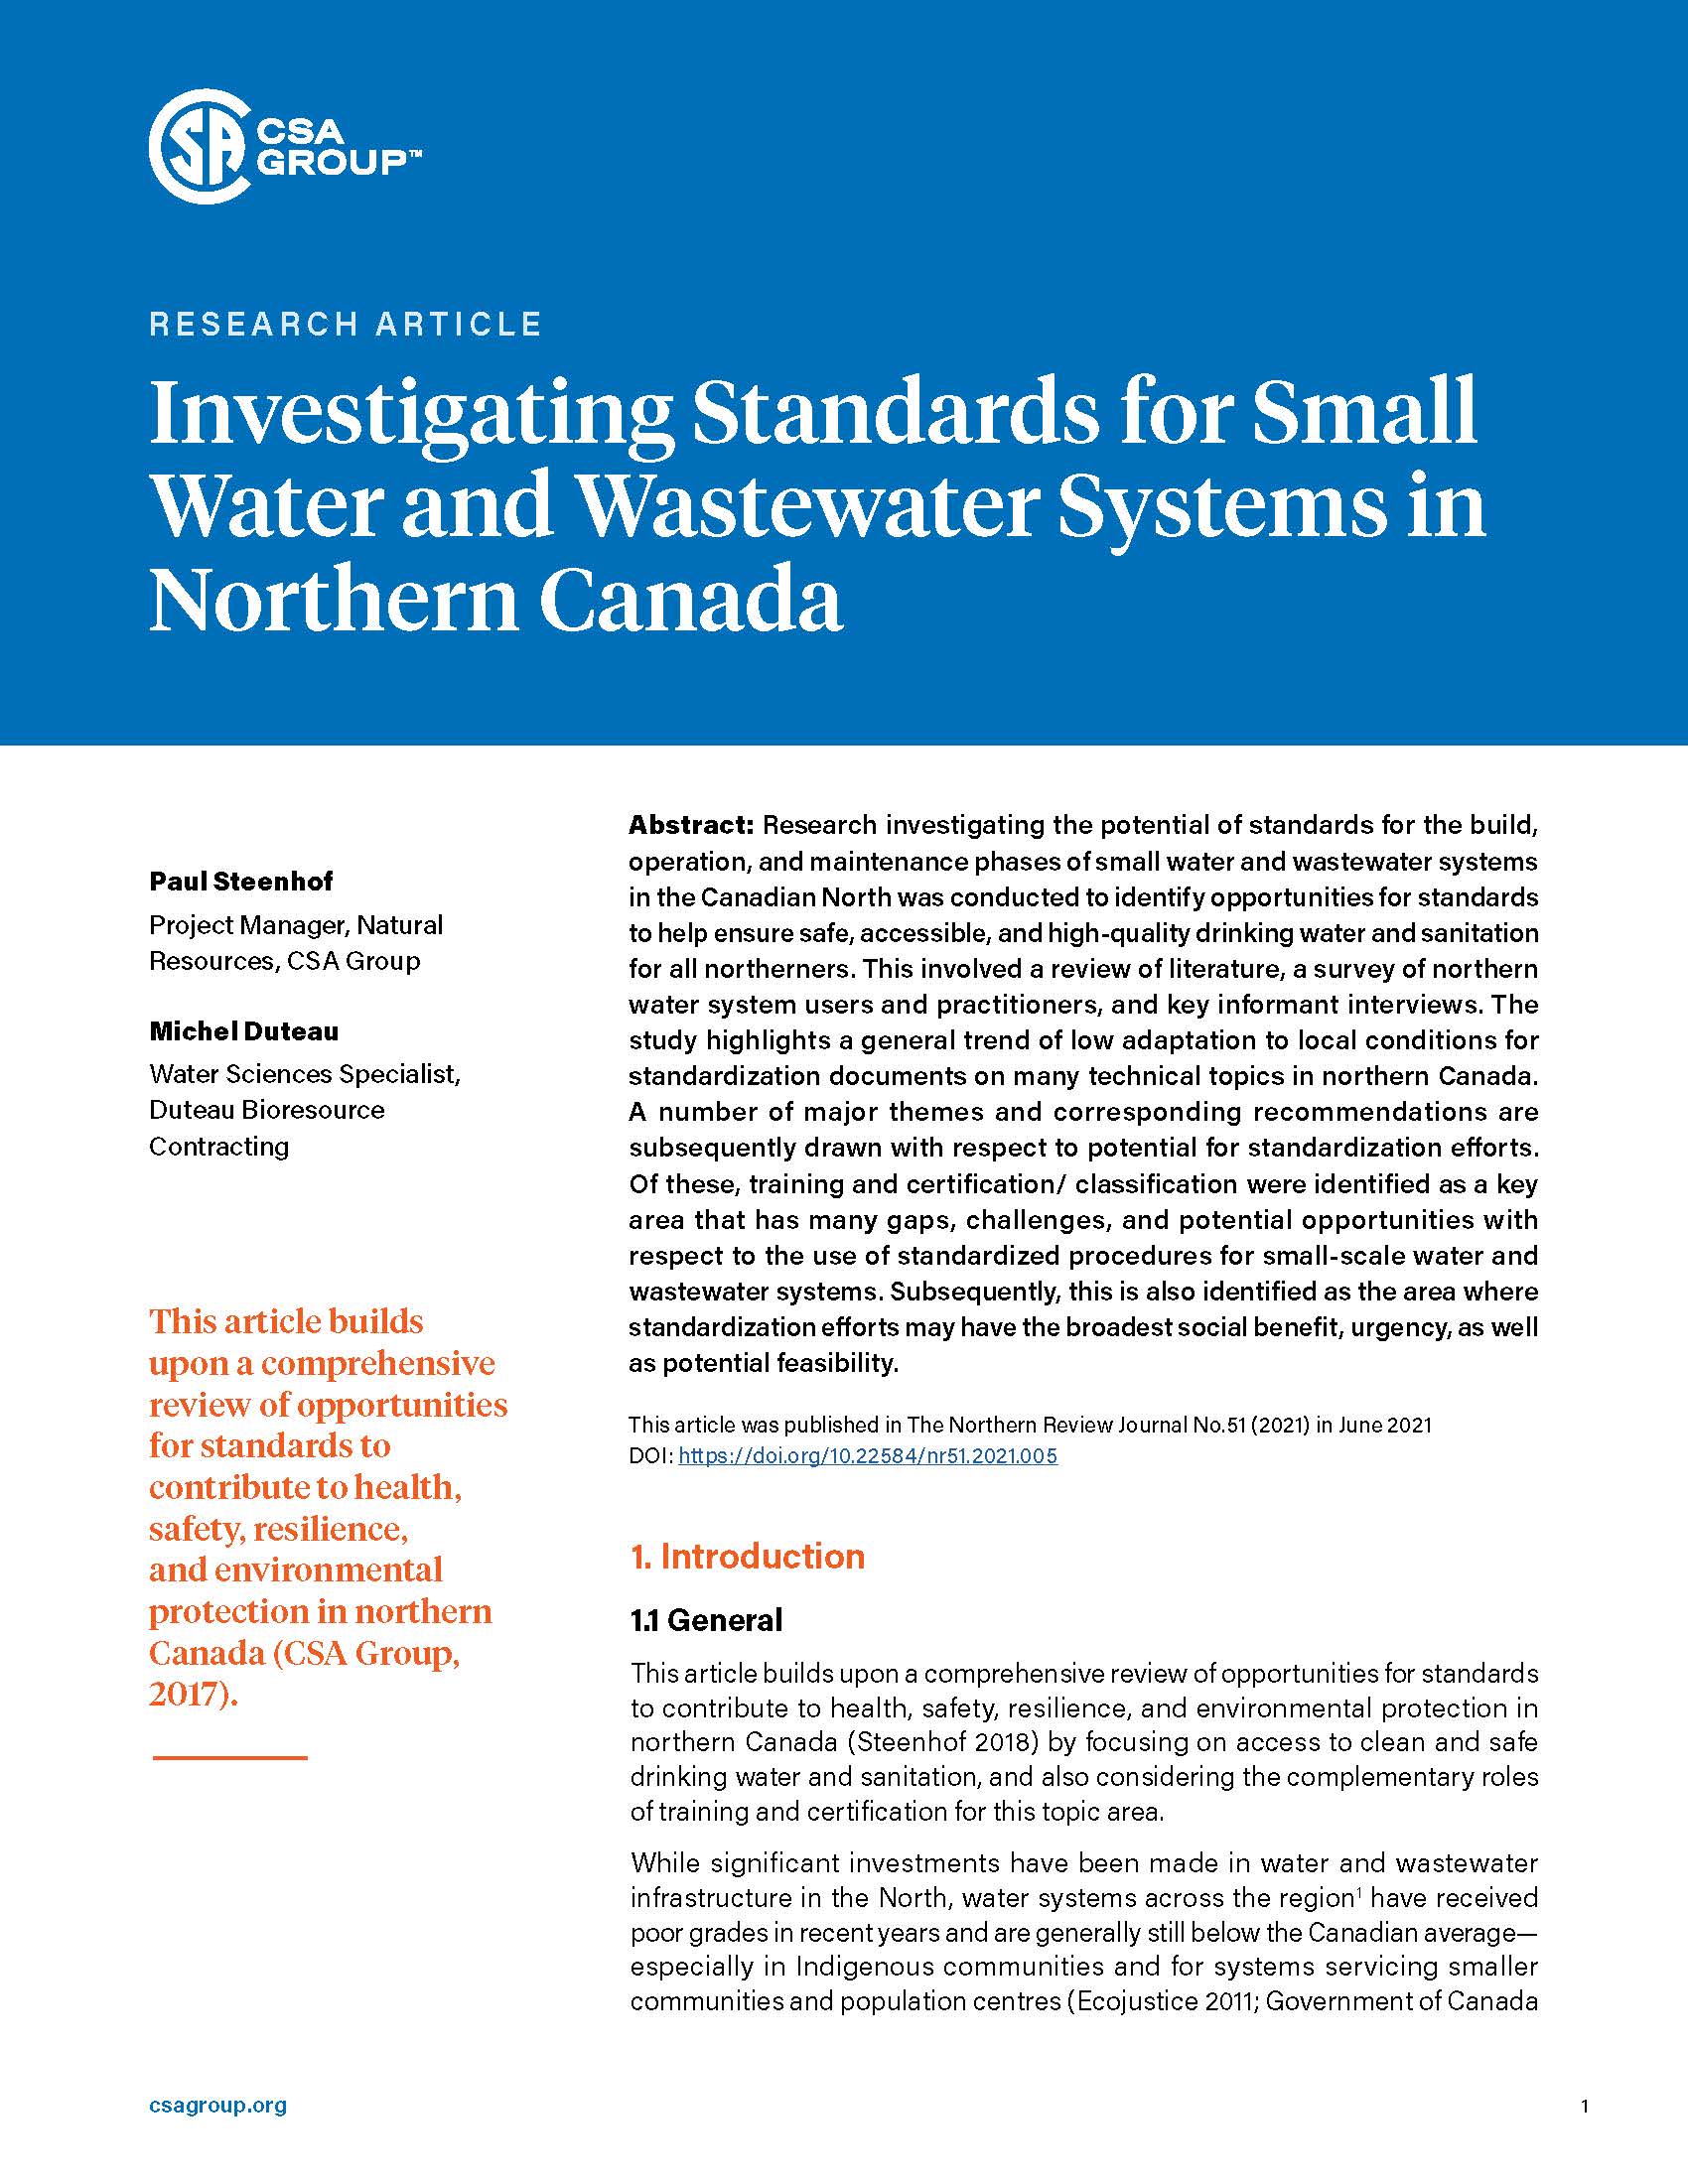 Featured Image. Investigating Standards for Small Water and Wastewater Systems in Northern Canada